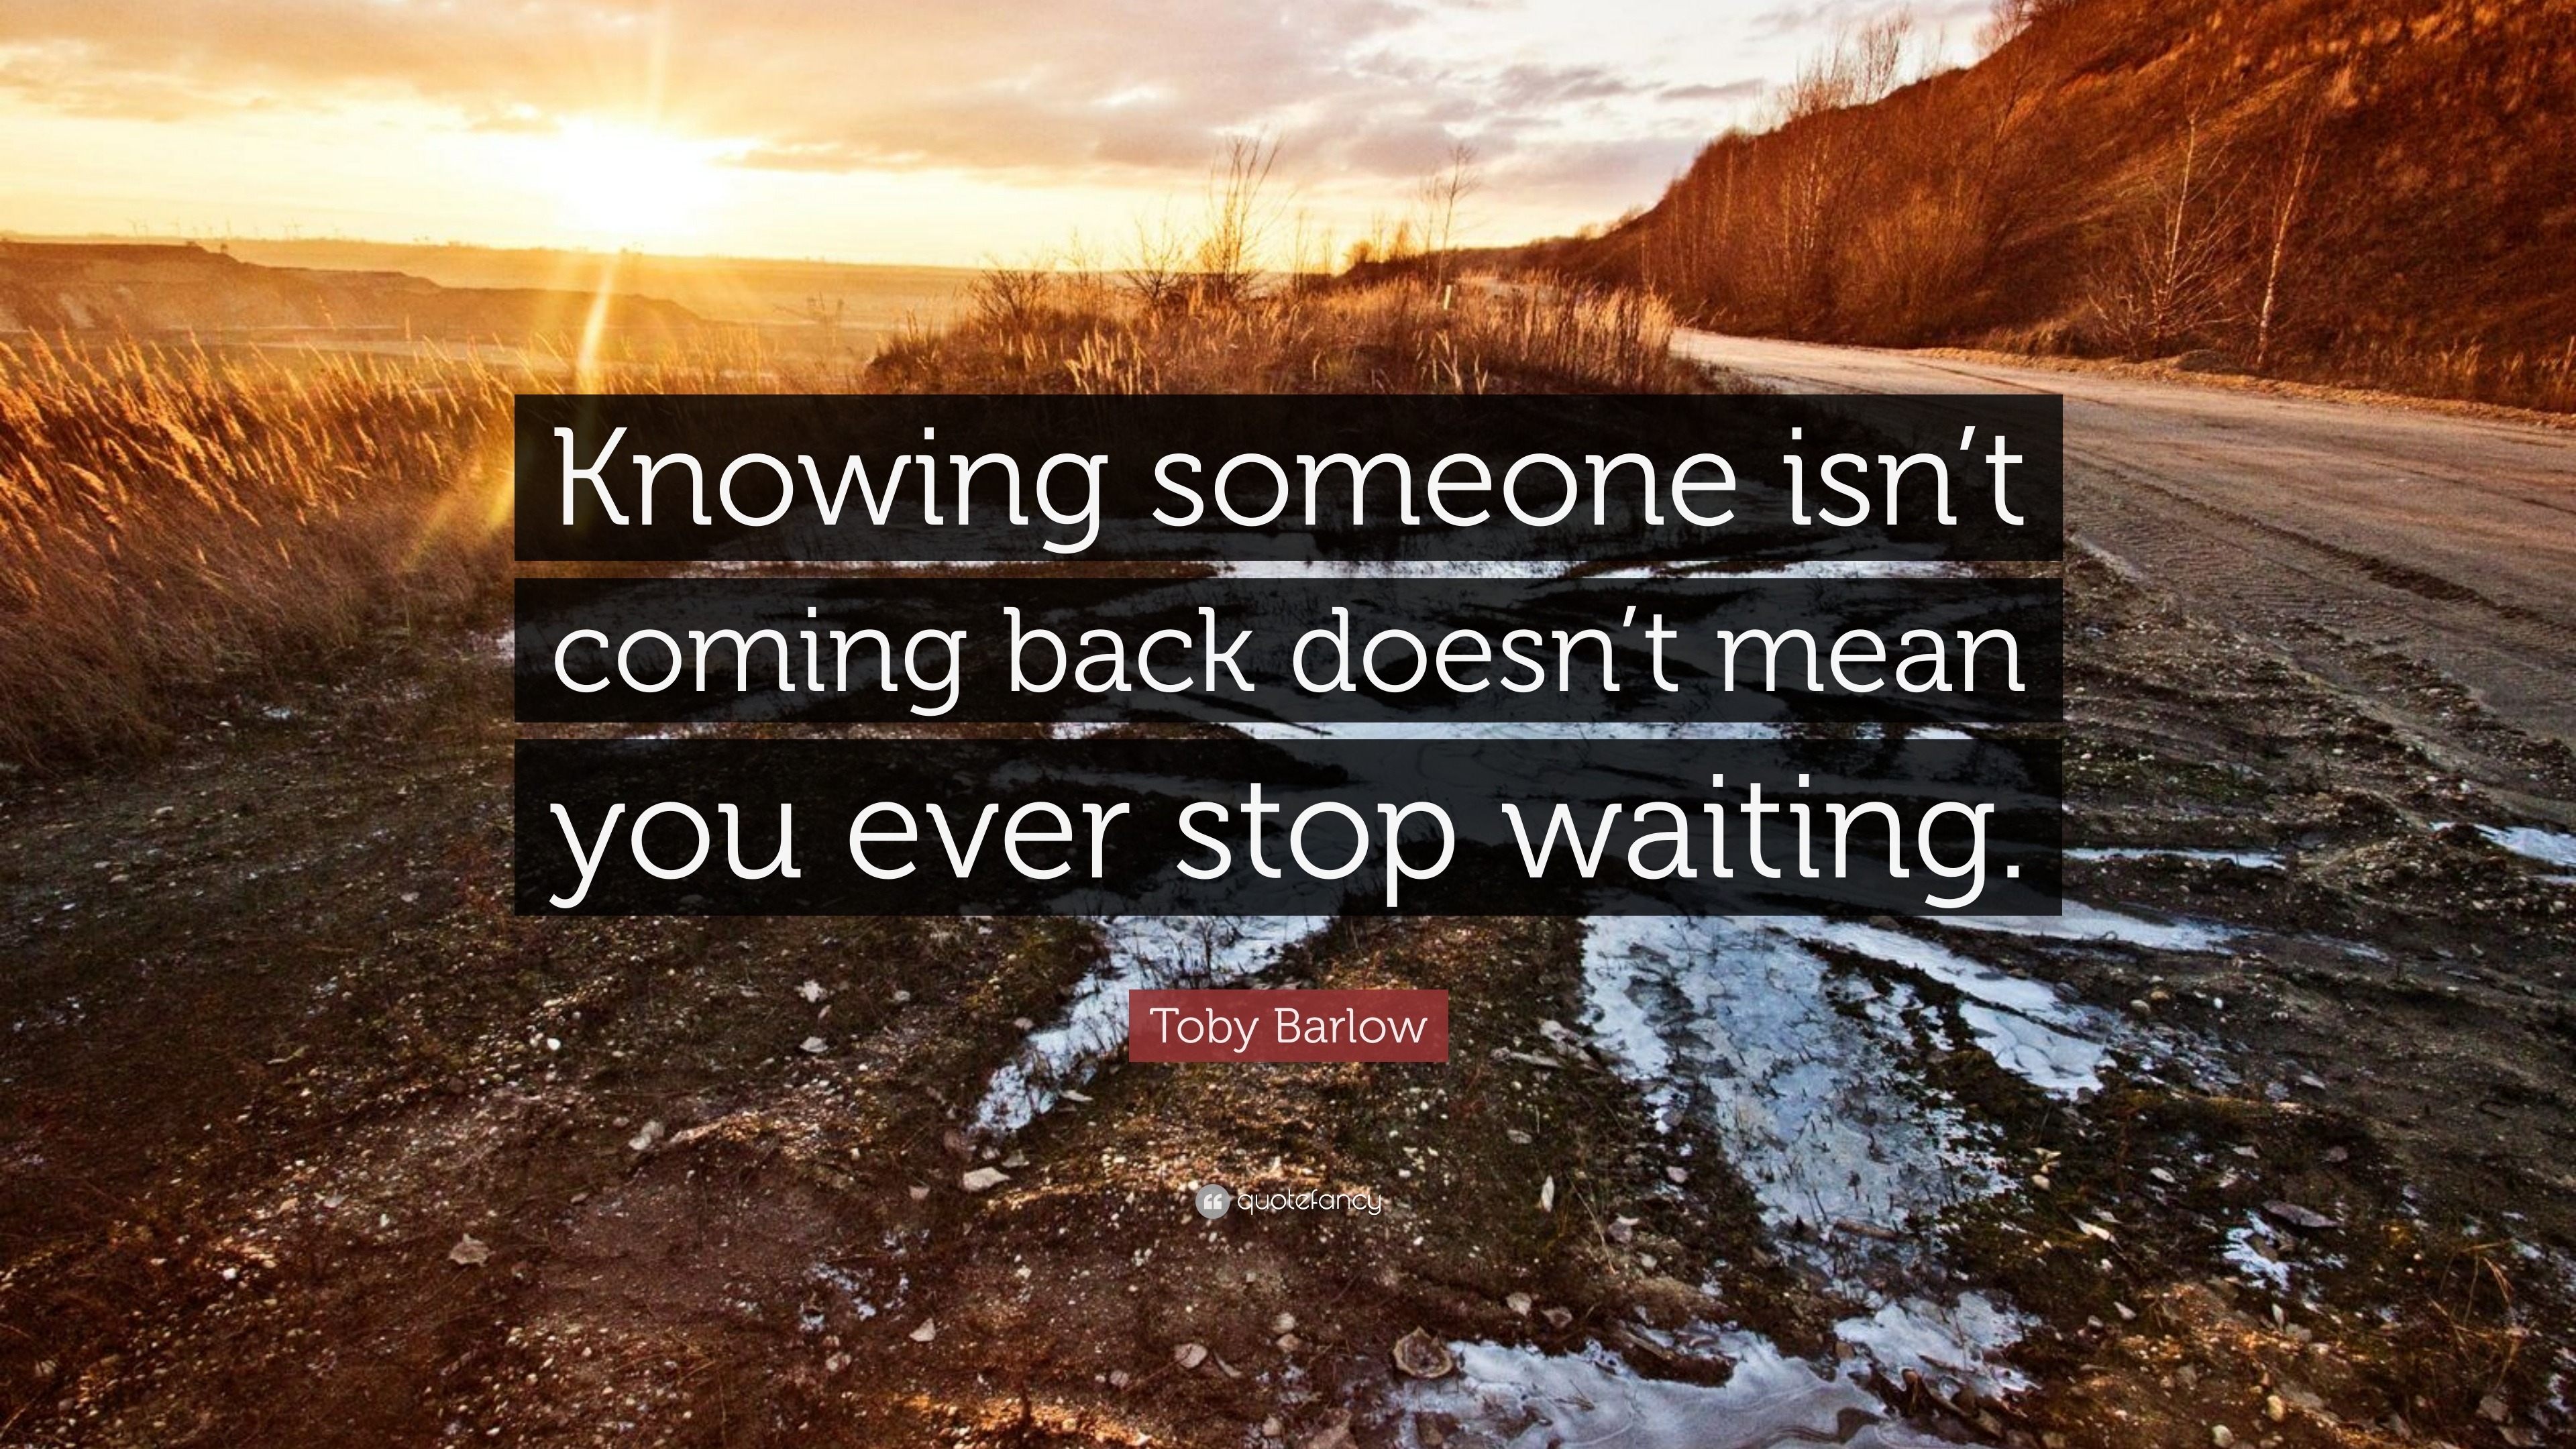 Toby Barlow Quote “Knowing someone isn t ing back doesn t mean